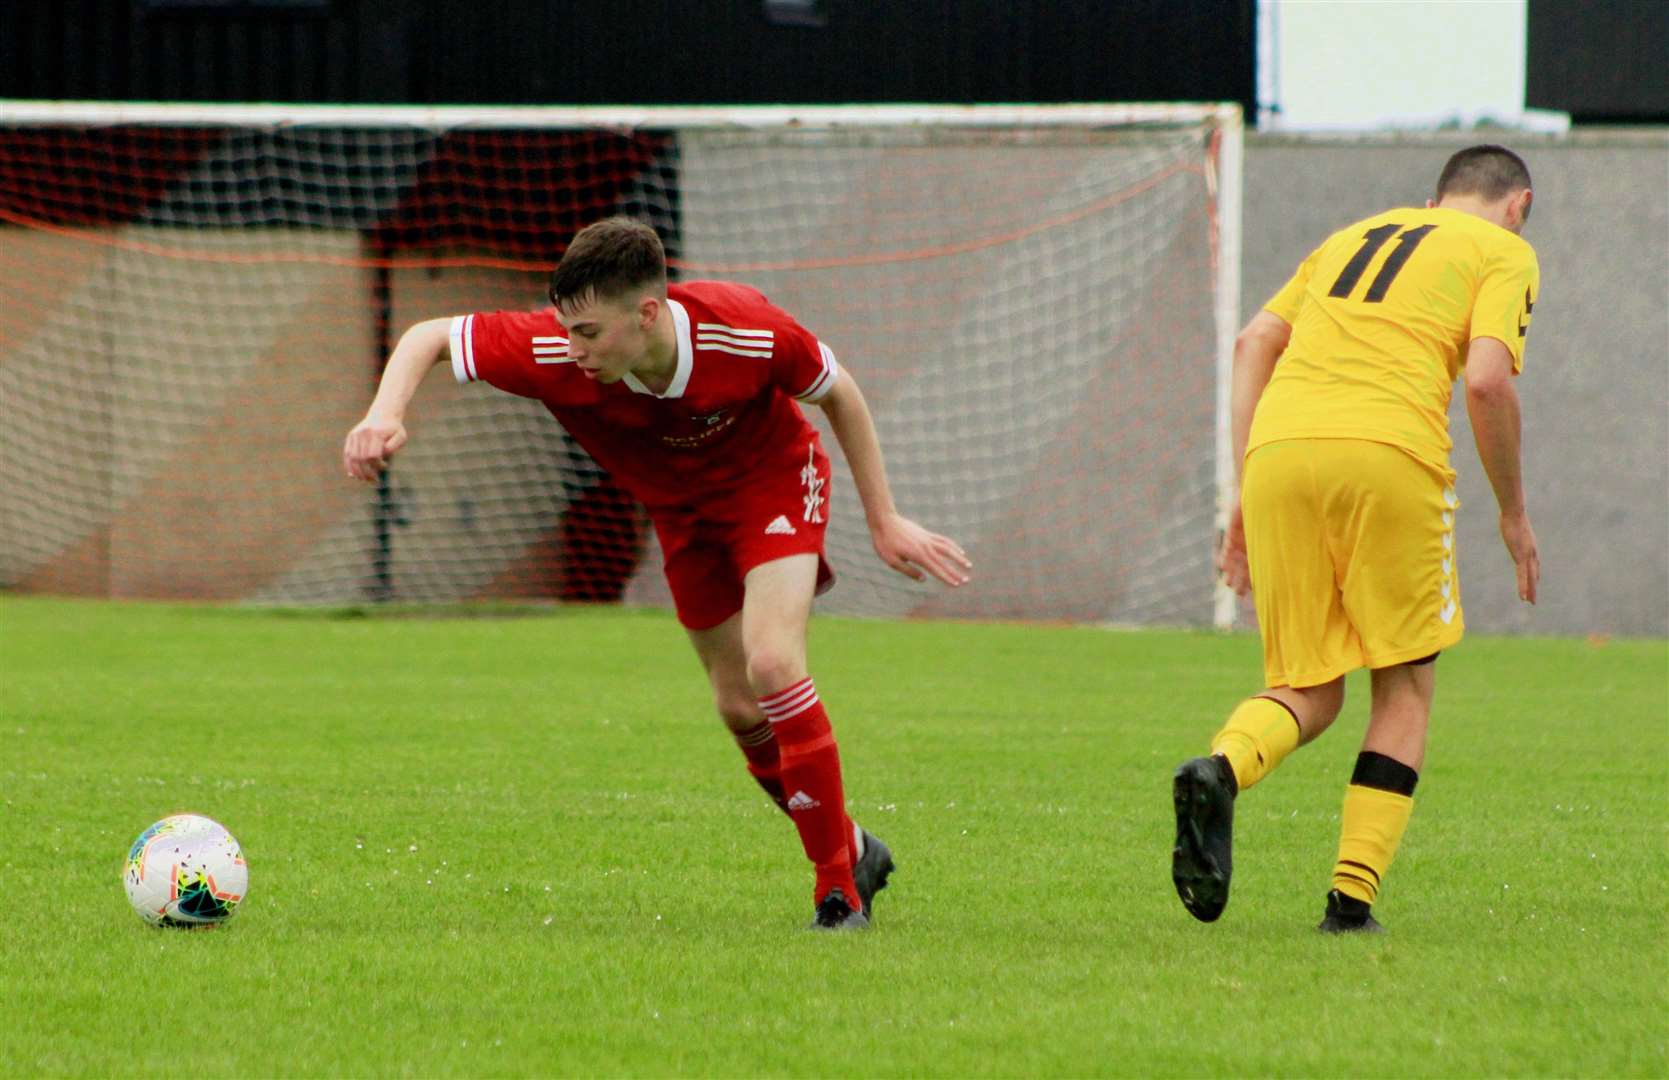 Conor Farquhar races forward for Wick Groats during their victory over Staxigoe United in midweek.